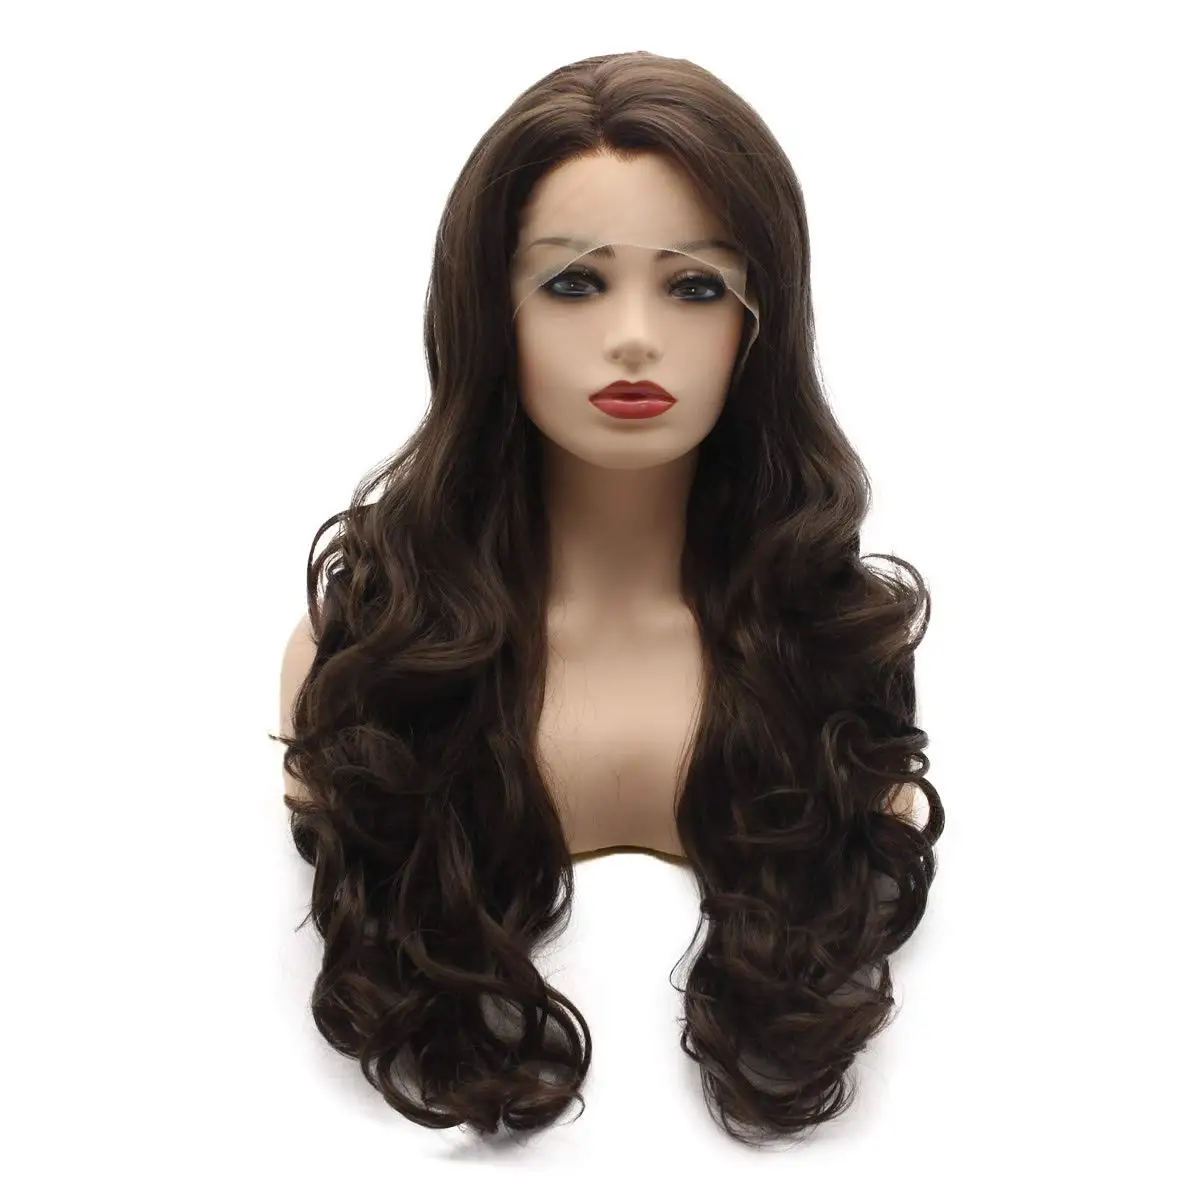 

Jeelion Hair Wavy Long 26inch Two Tone Brown Mix Half Hand Tied Realistic Synthetic Lace Front Wigs